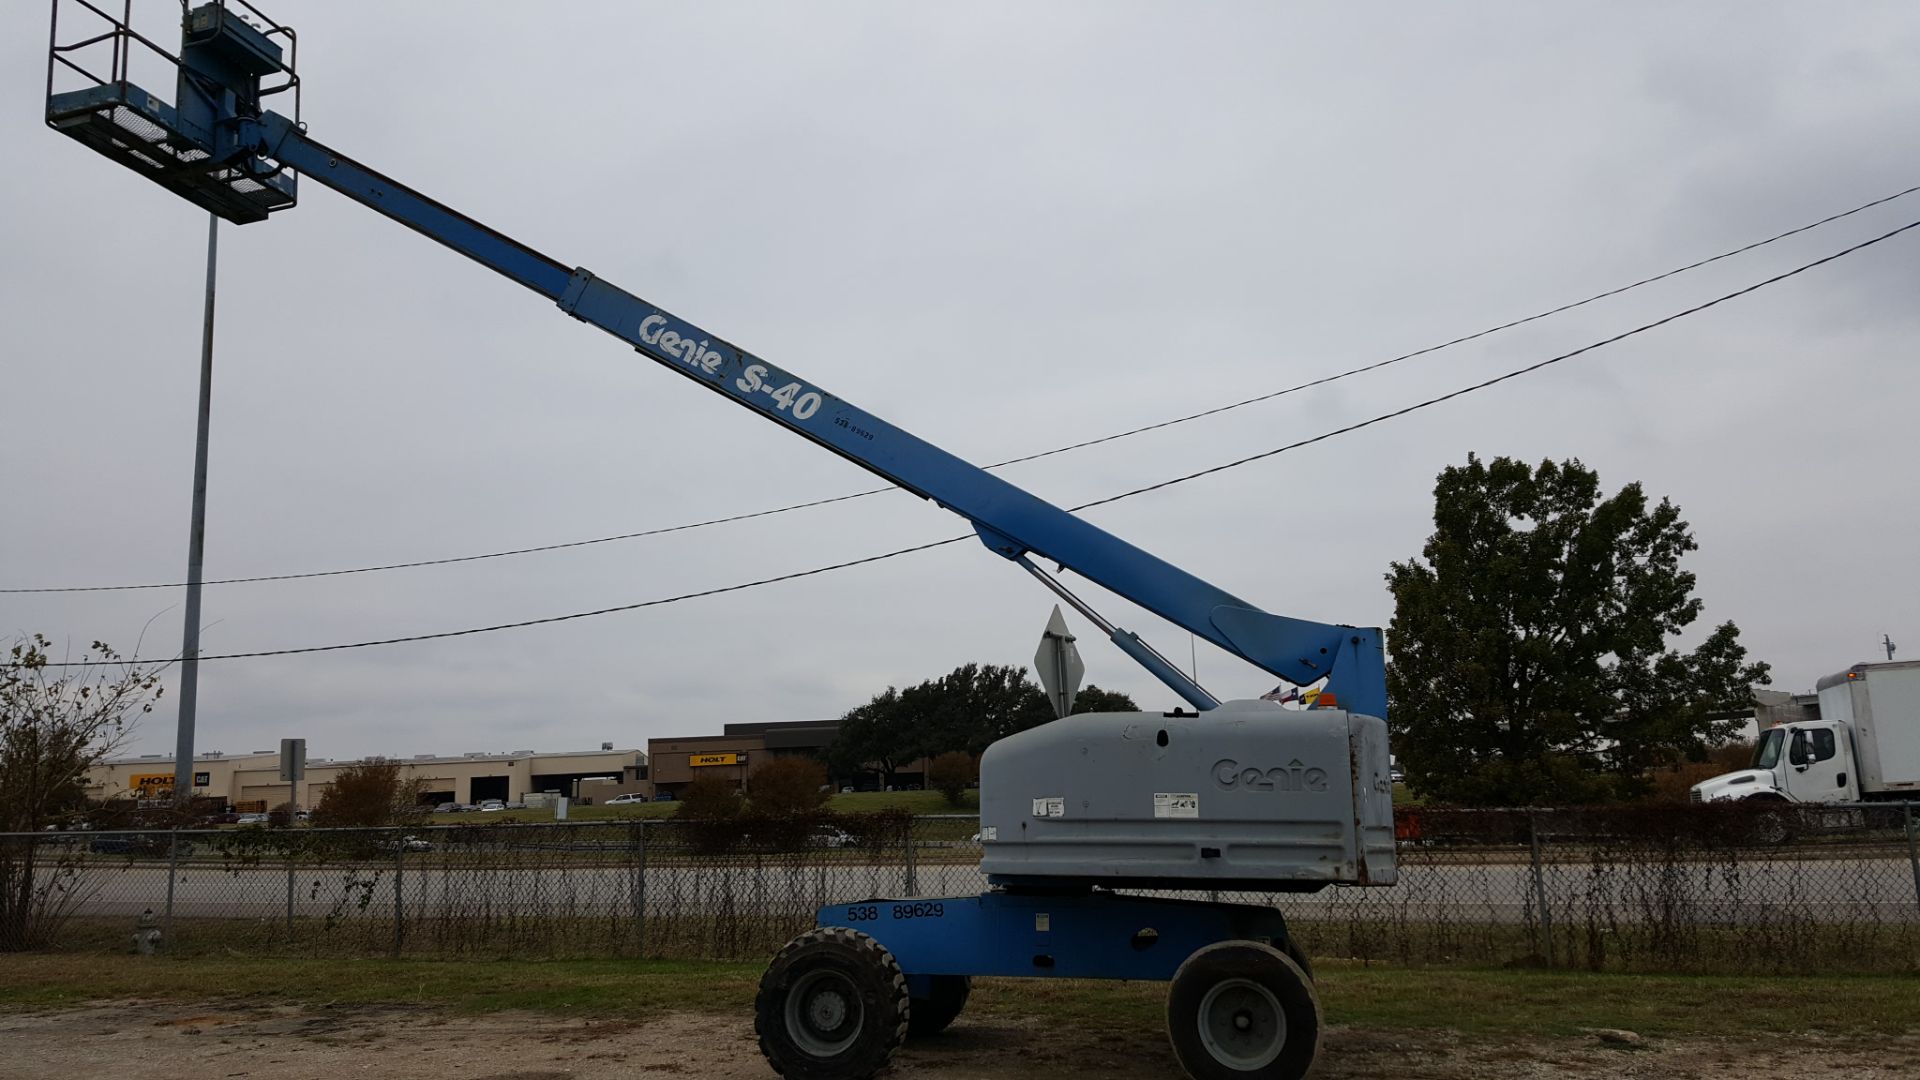 TELESCOPING BOOM MANLIFT, GENIE MDL. S40, new 1998, 40' 2-section boom lift, Ford 4 cyl. LPG engine,